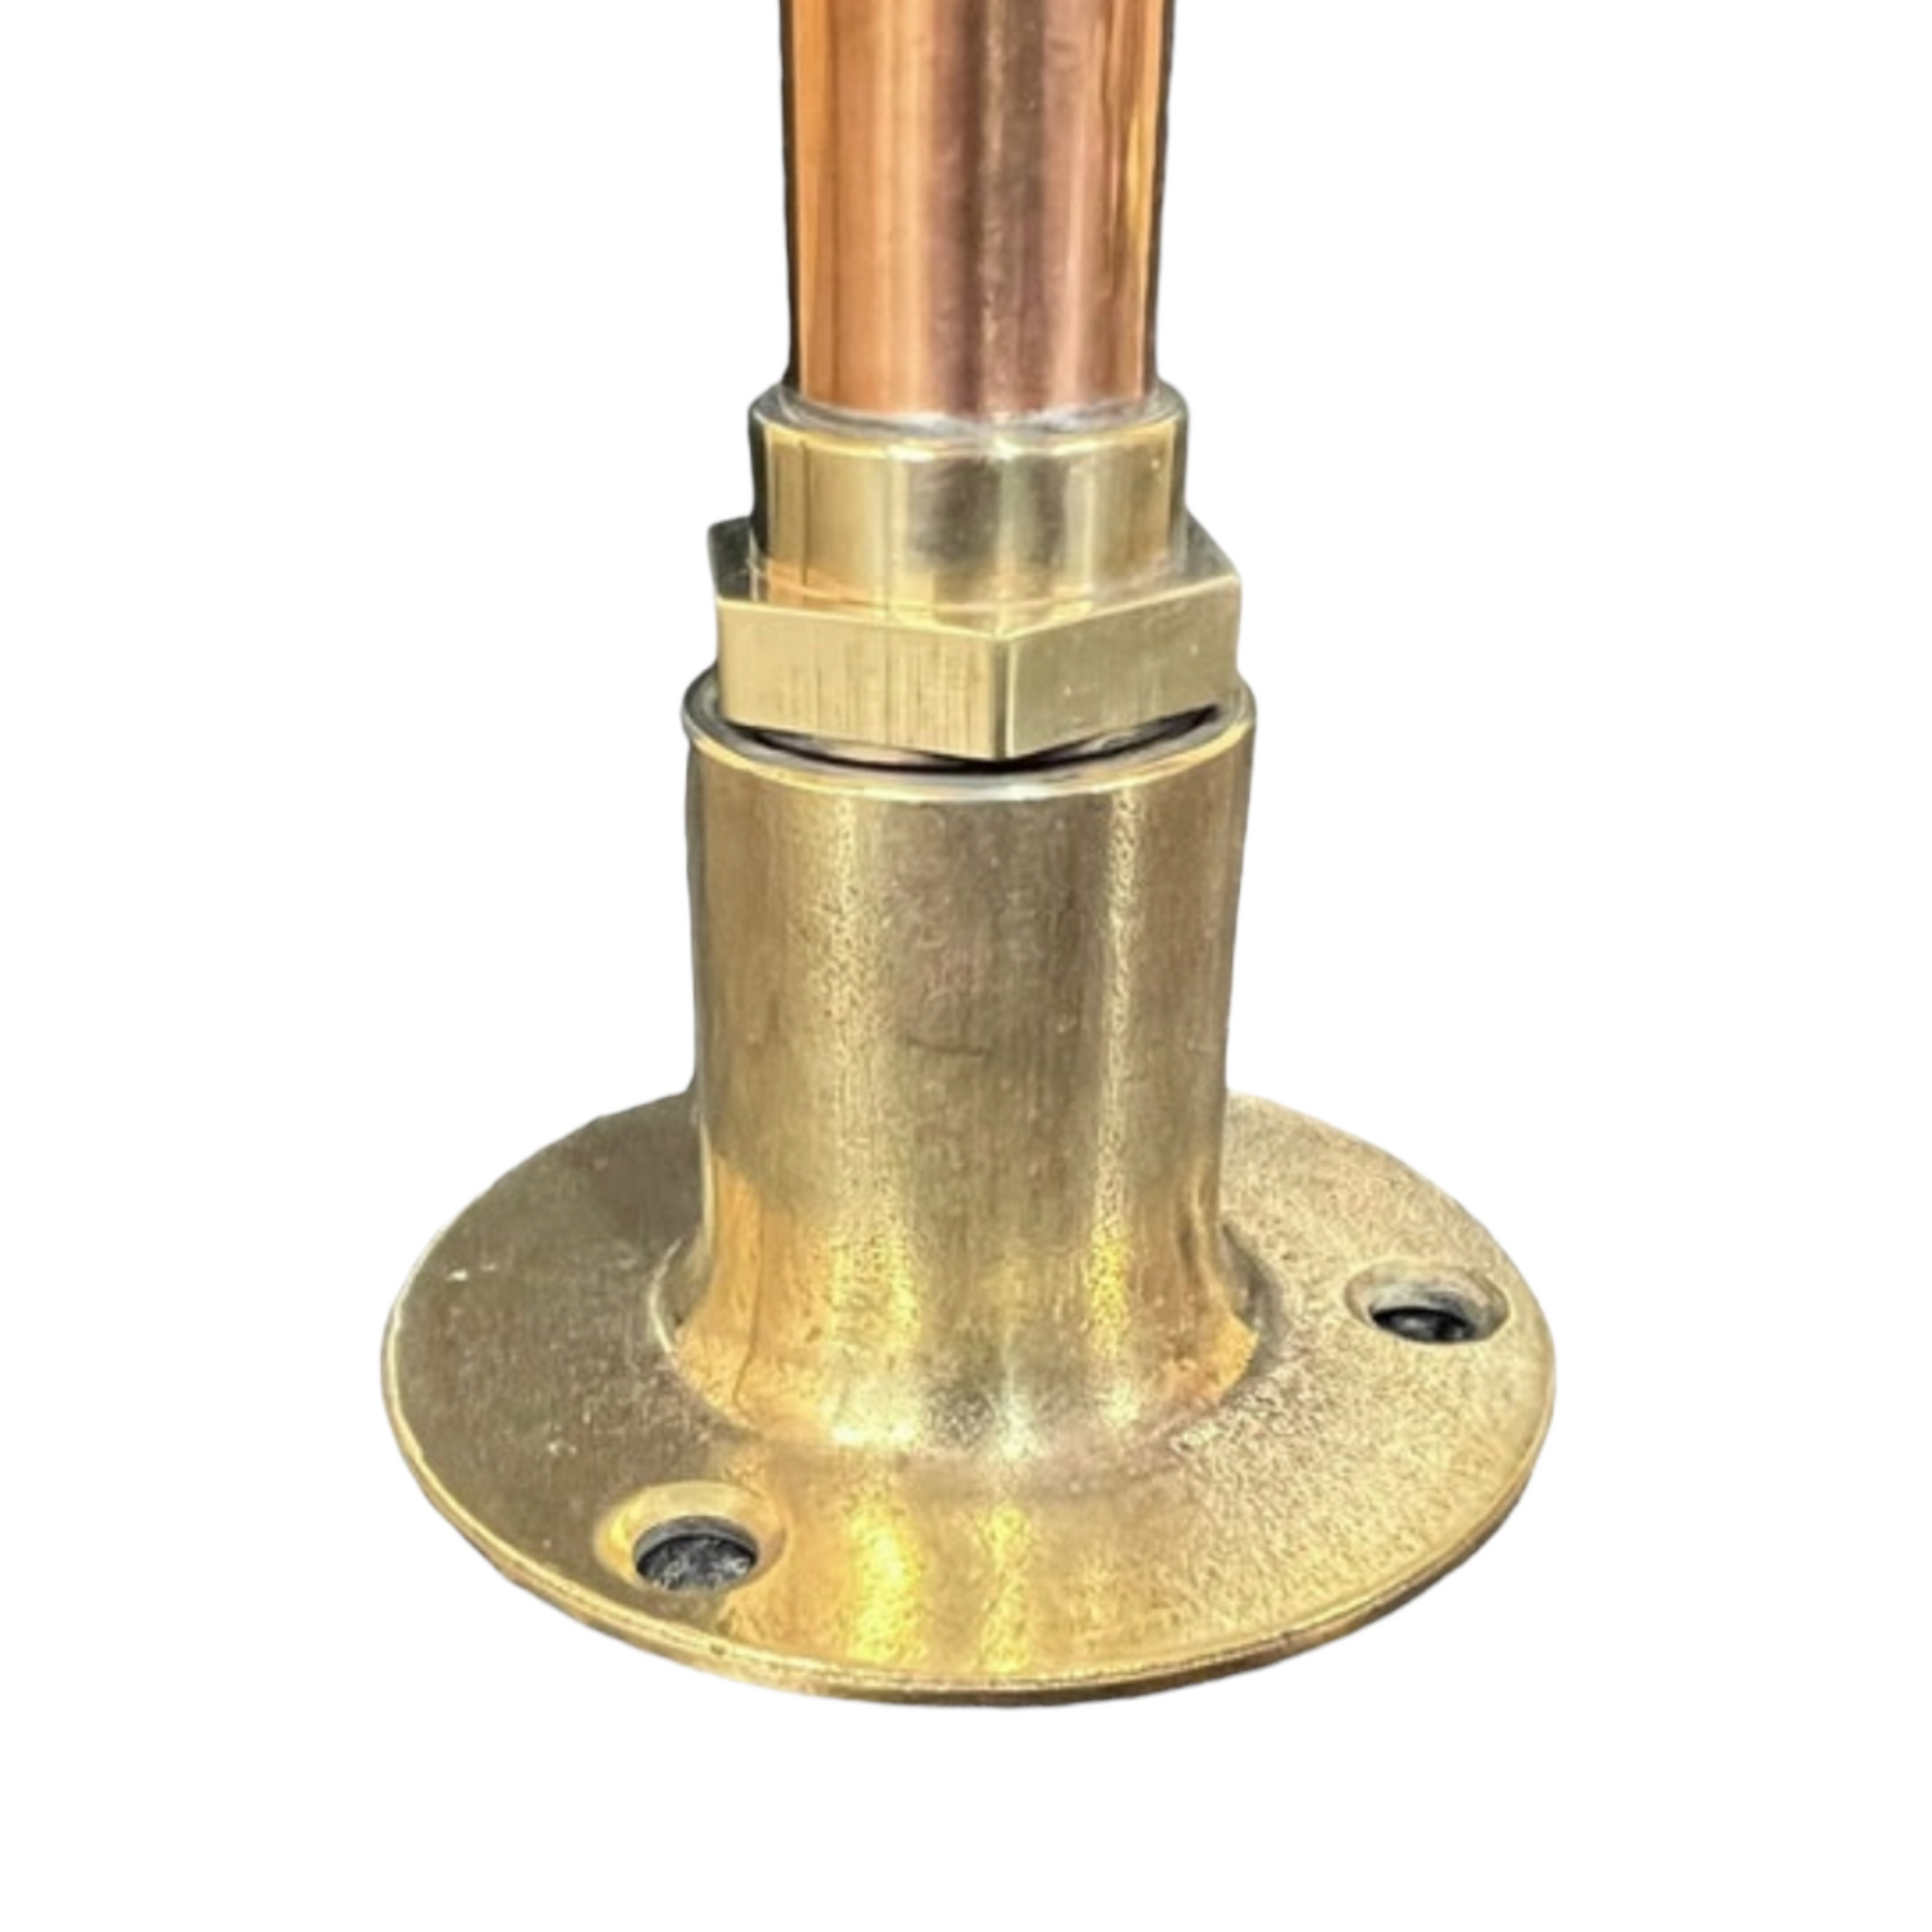 Copper and brass handmade tap with brass base plate sold by All Things French Store